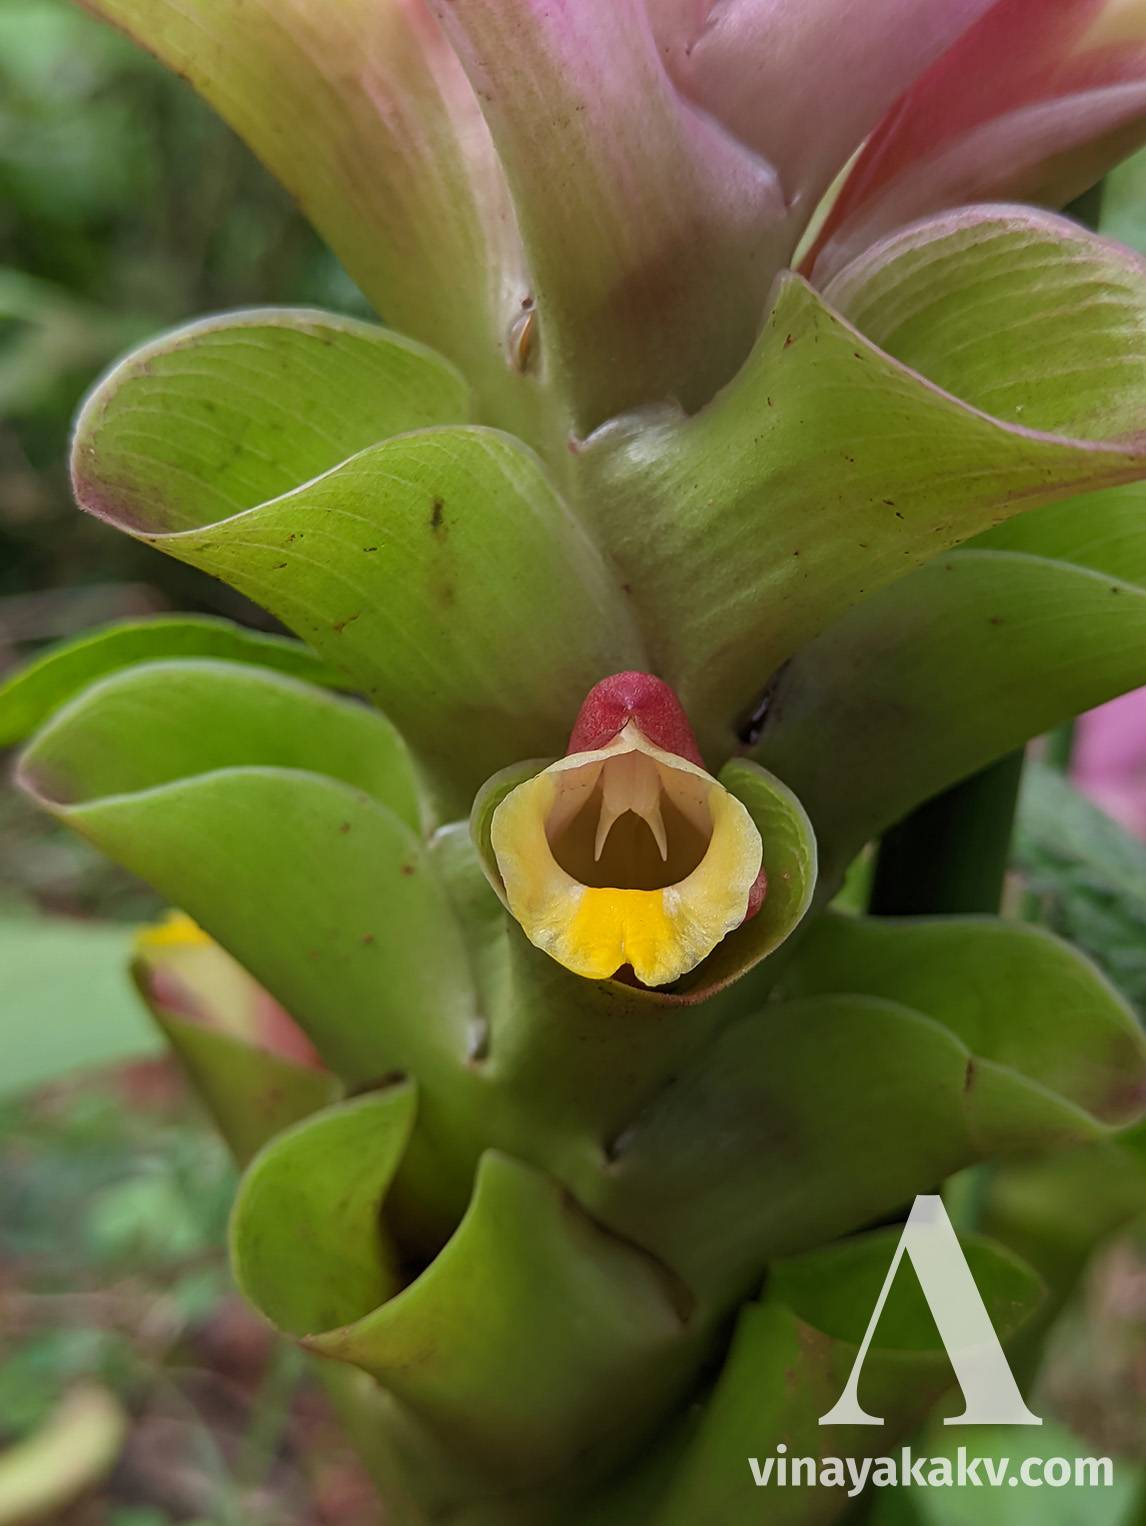 Flower of a _Curcuma_ species with the cluster having a pinkish color